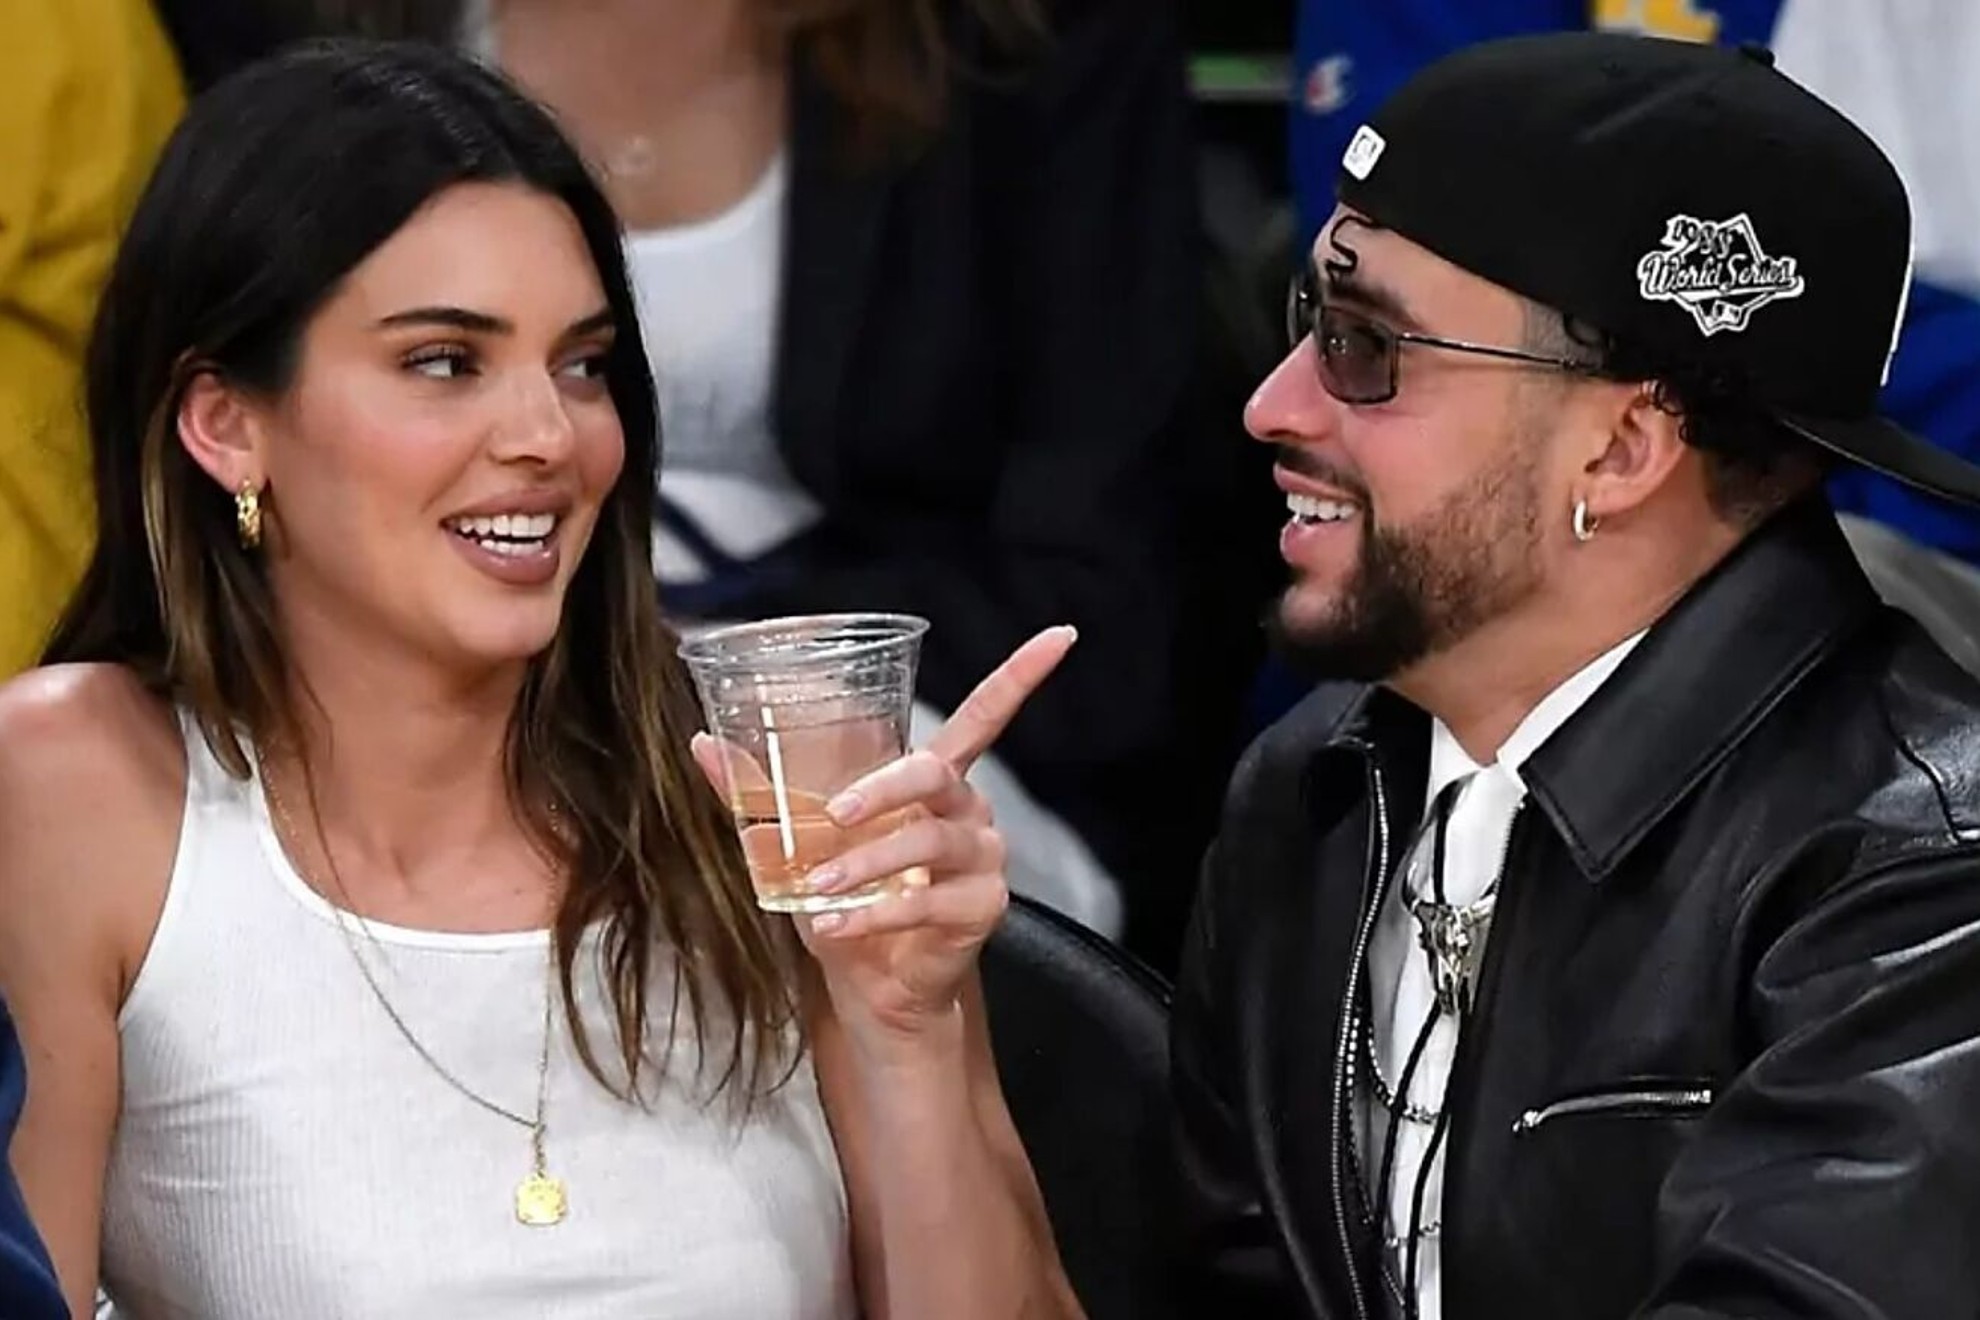 Kendall Jenner and Bad Bunny: Love or arrangement? All the past